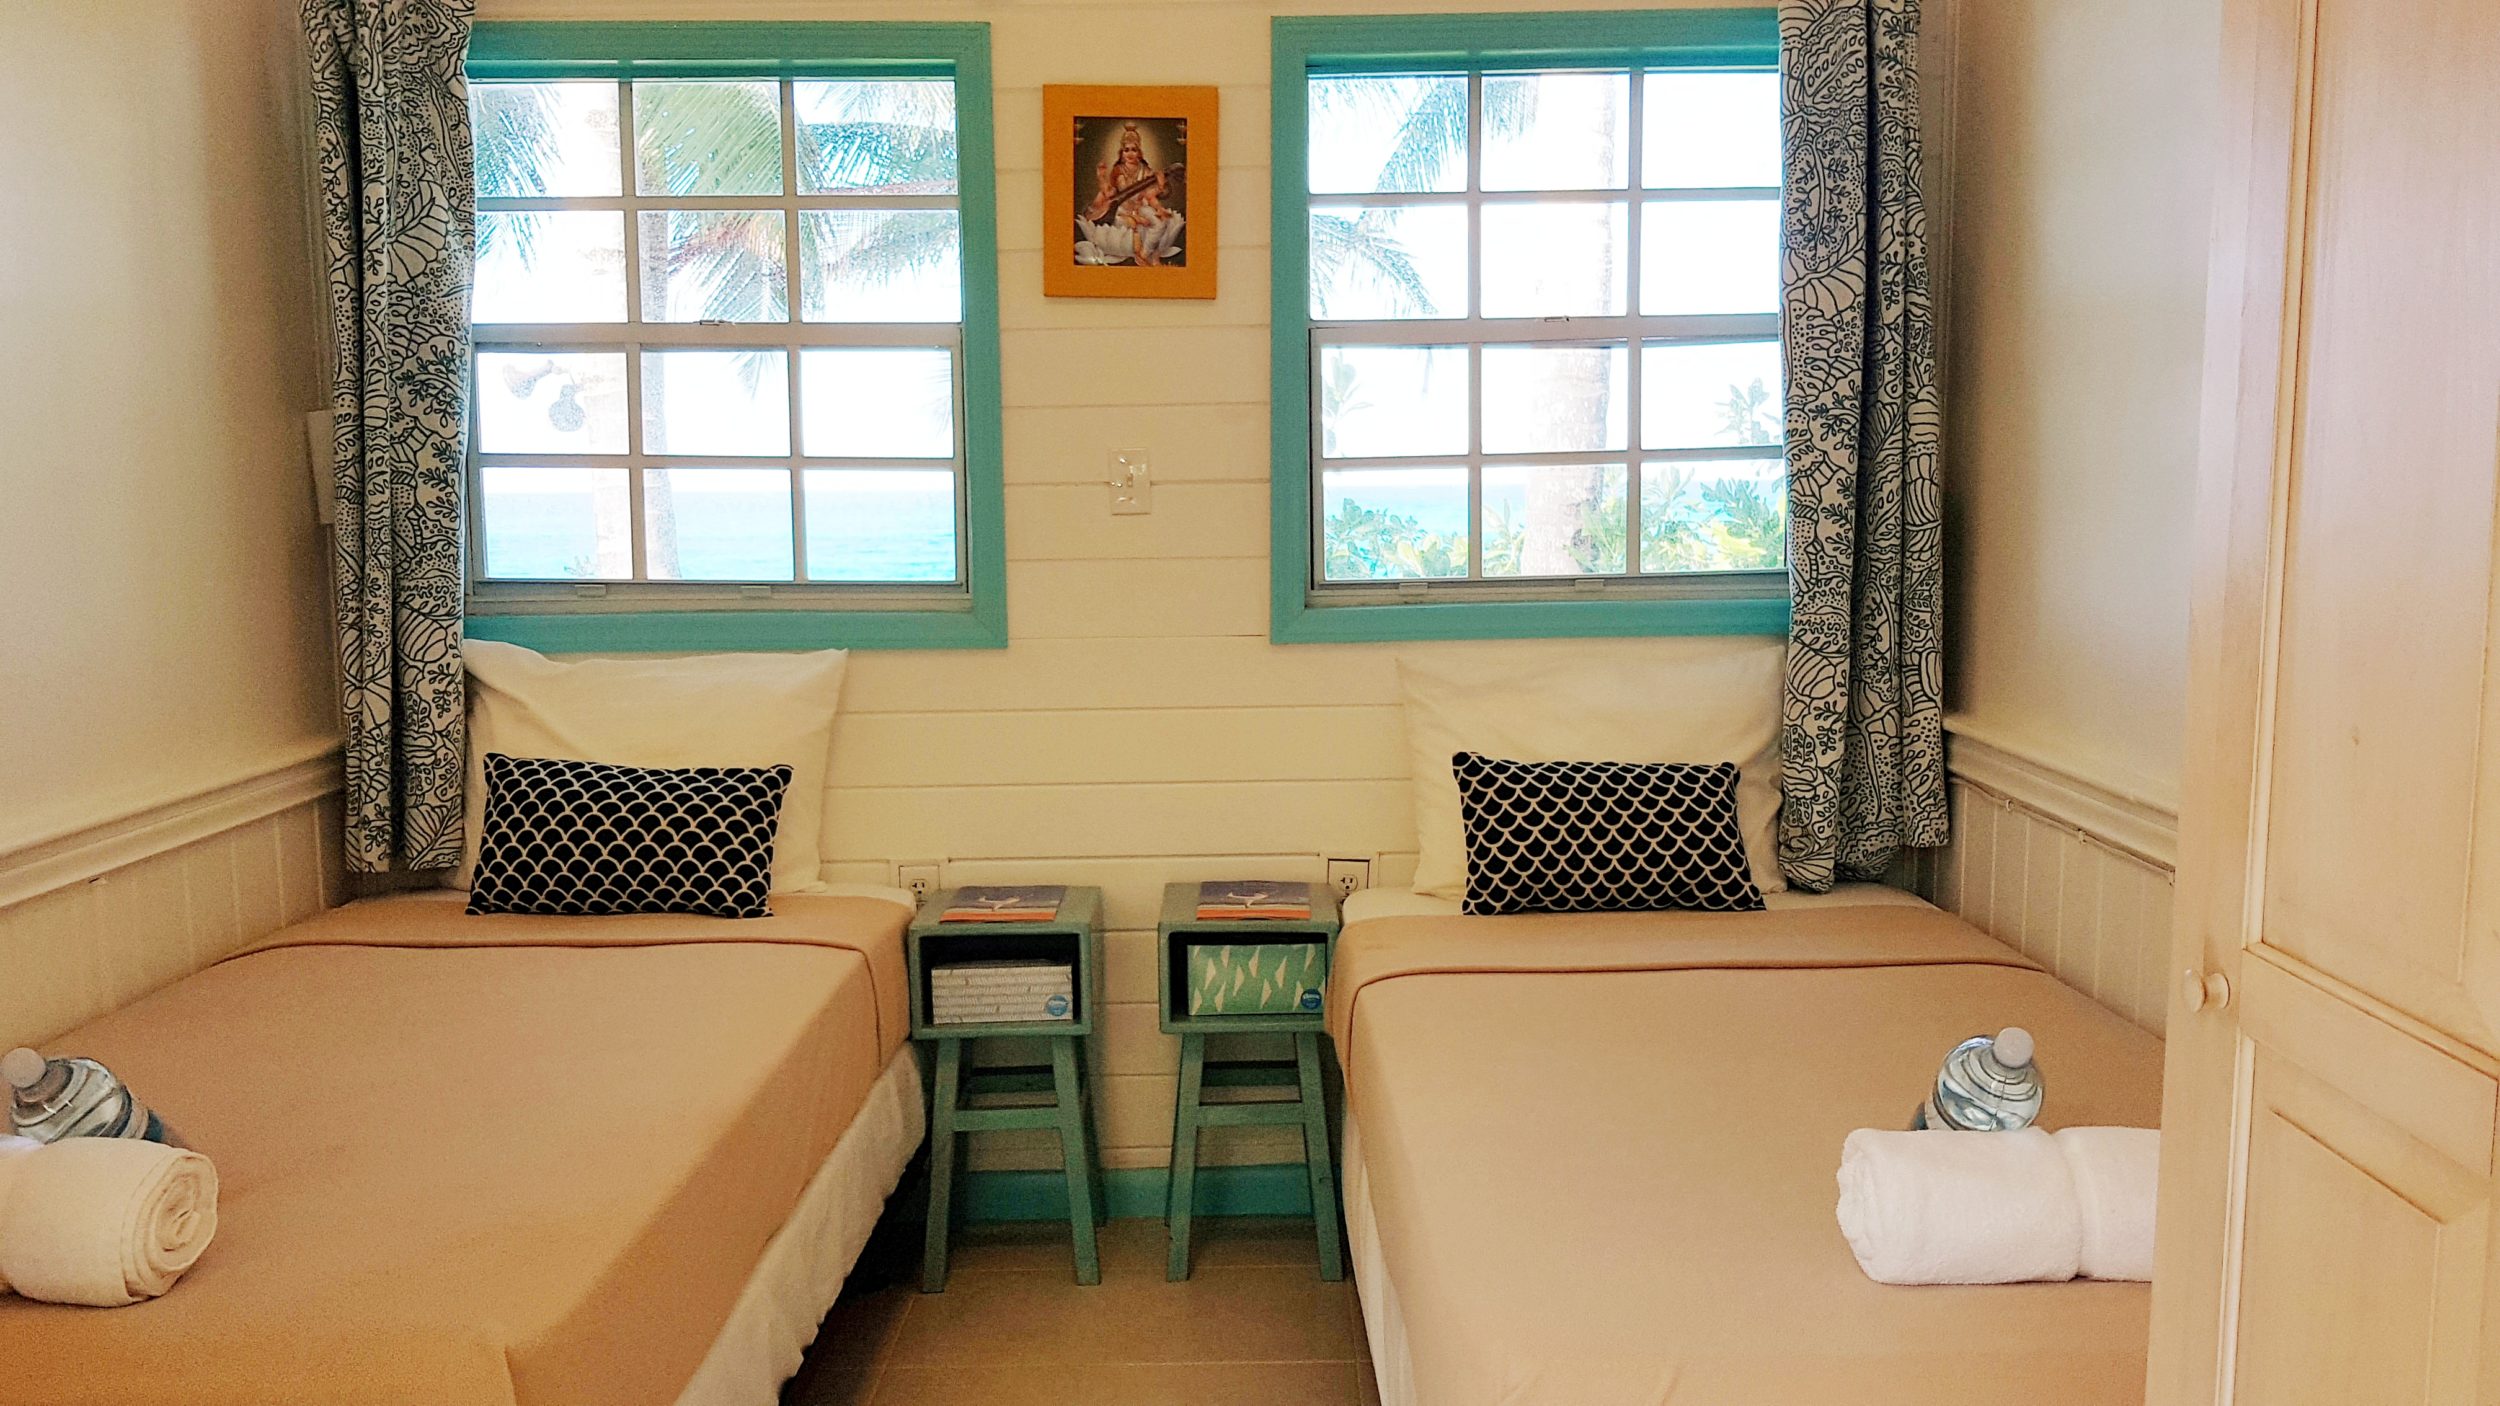 Beach Hut West - Two twin beds in a room overlooking the ocean